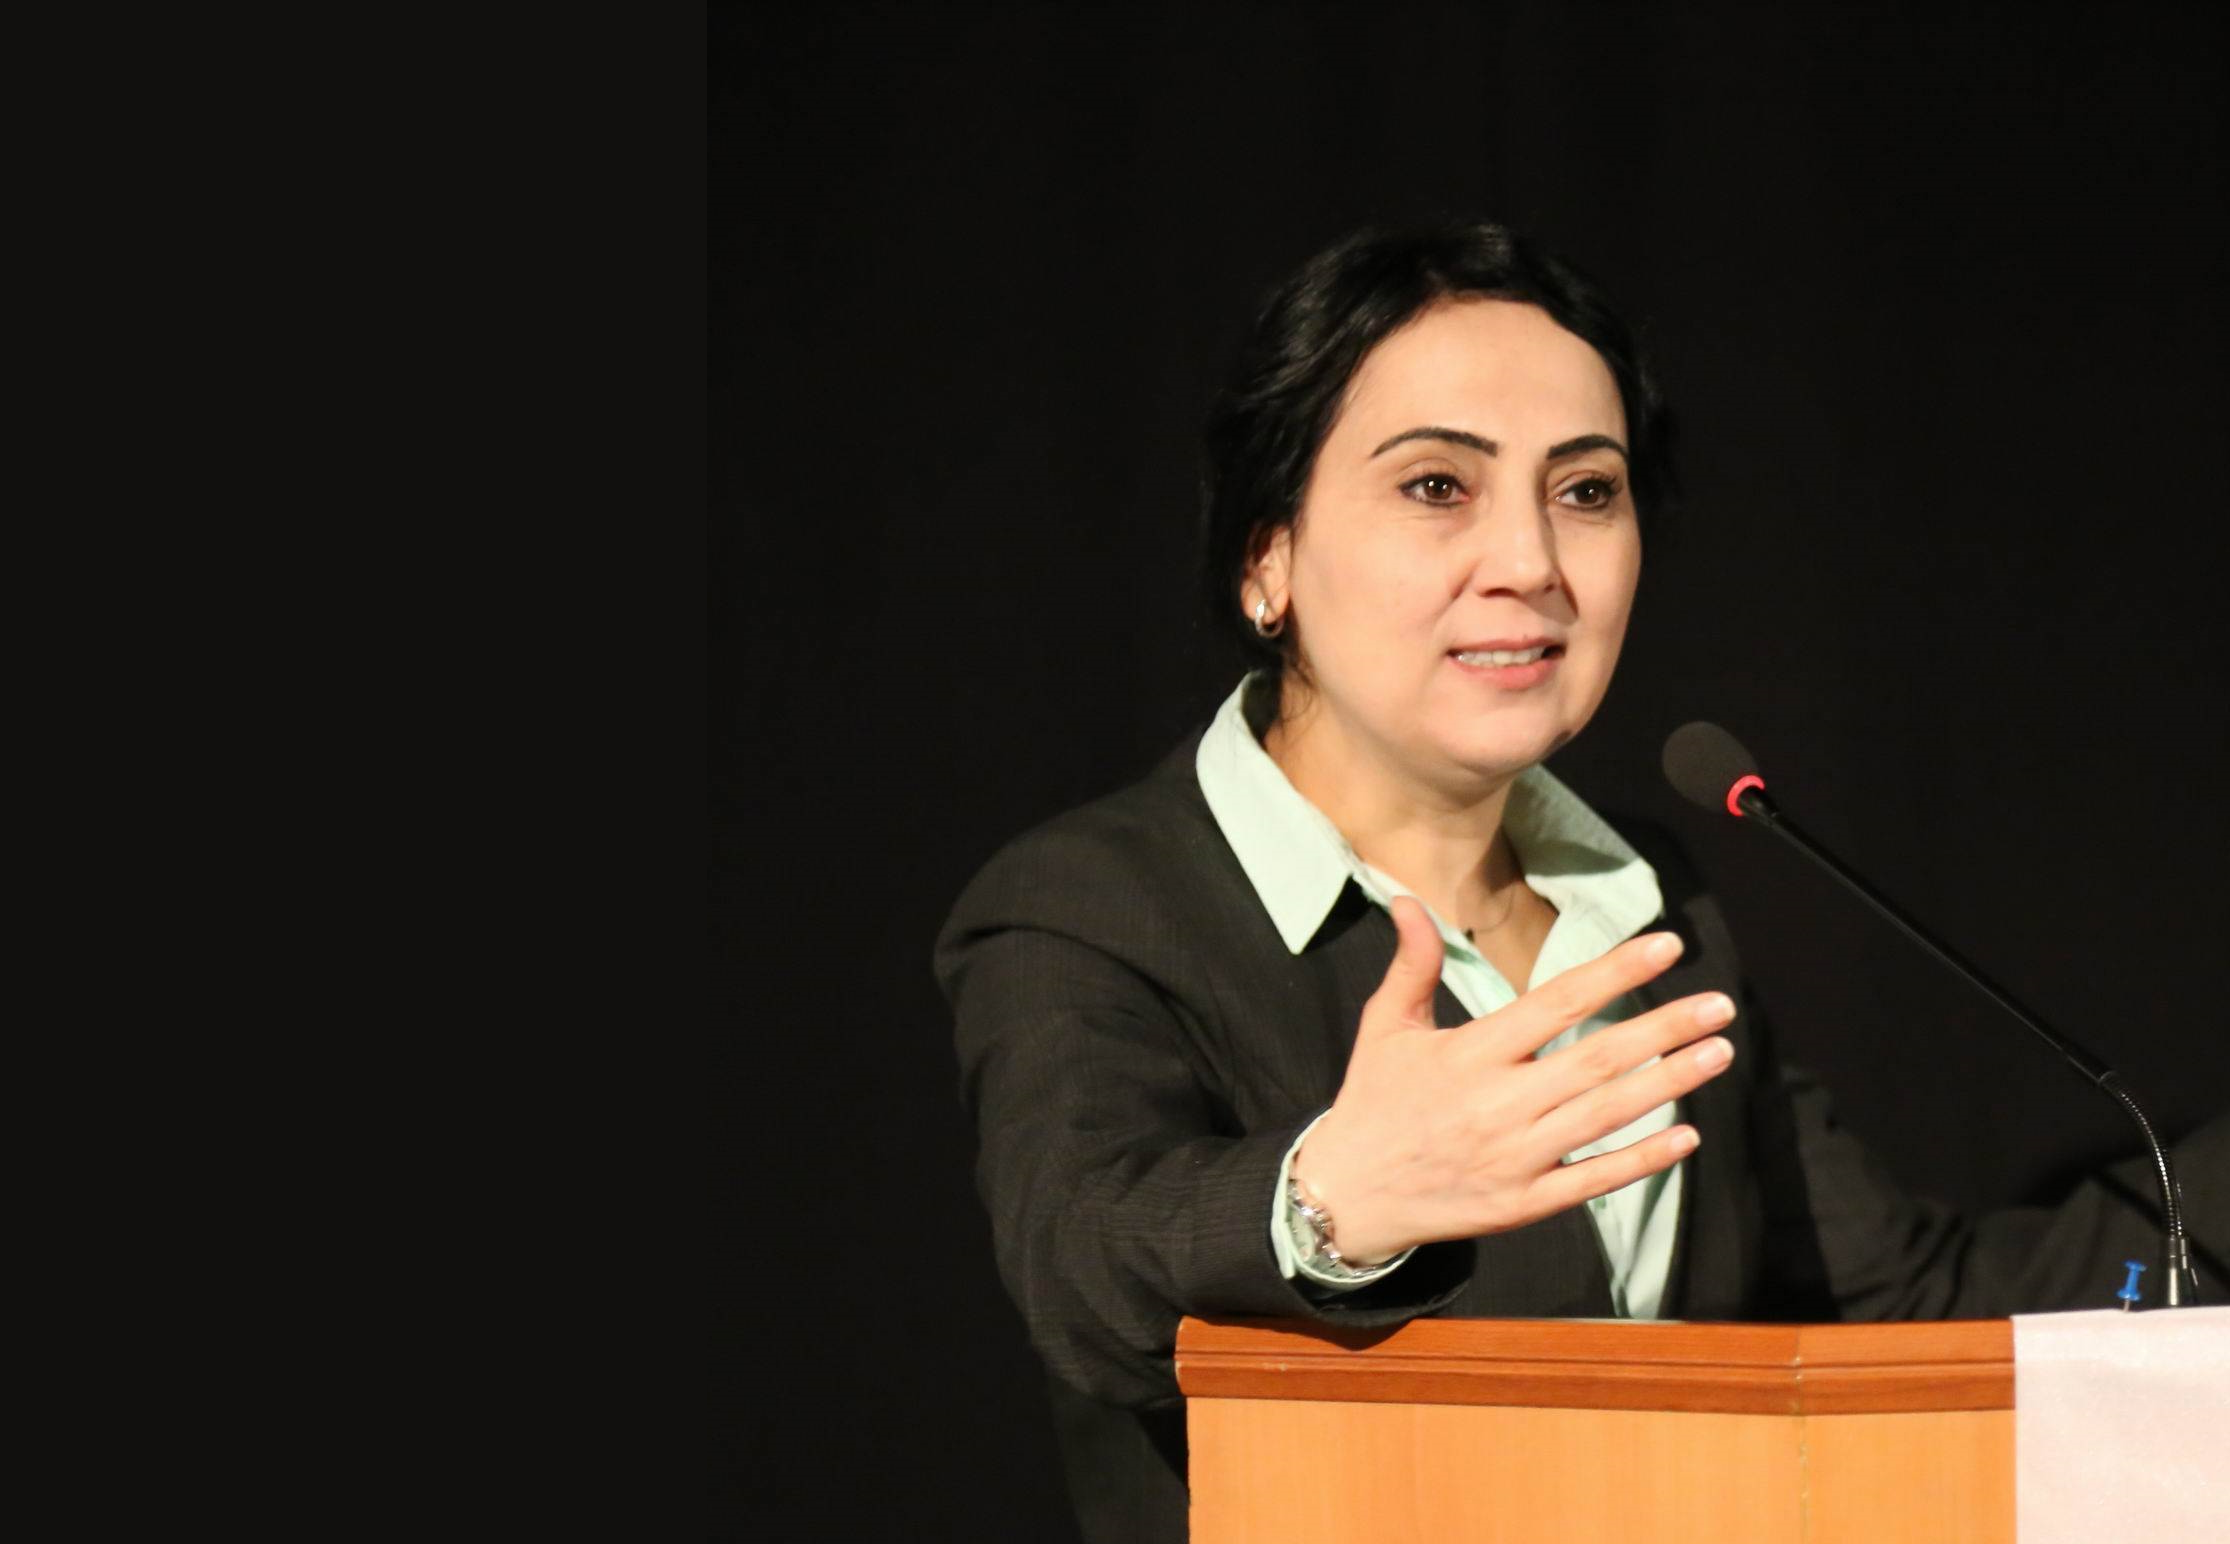 Letter from Yüksekdağ to the Dutch parliamentarians